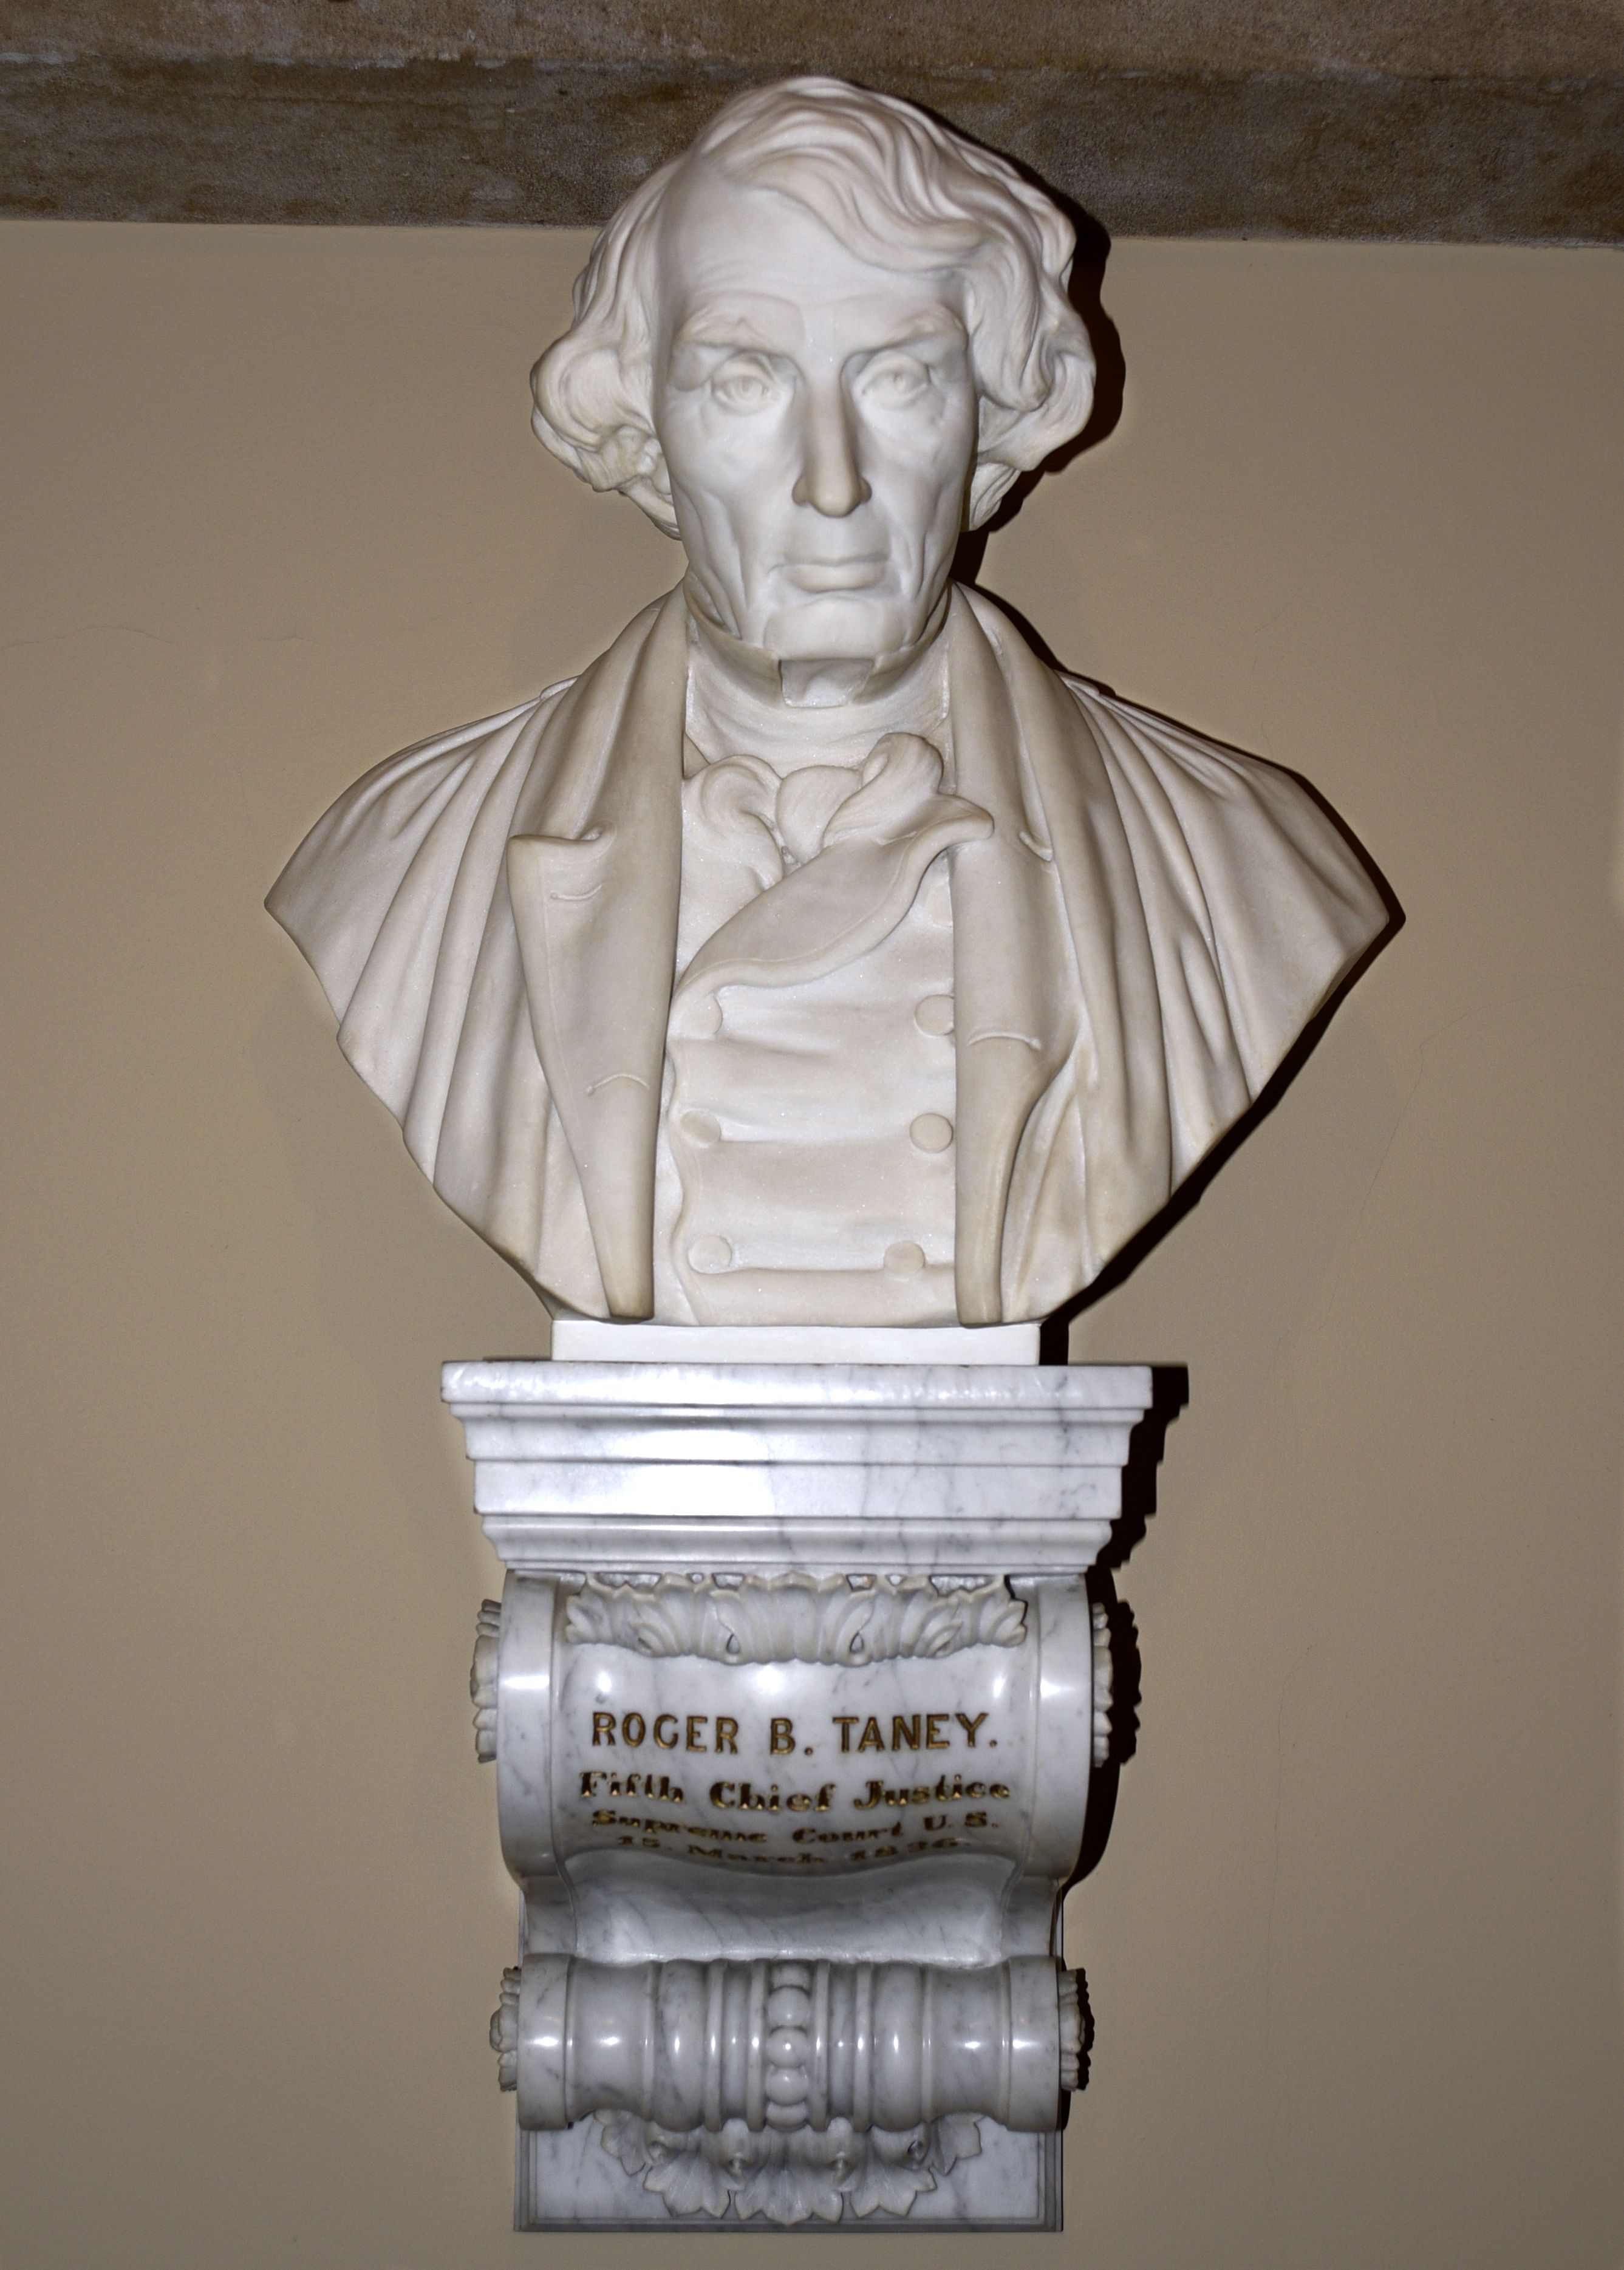 A marble bust of Roger Taney, former Chief justice of the U.S. Supreme Court, on display in the Old Supreme Court Chamber in the U.S. Capitol in Washington, D.C.